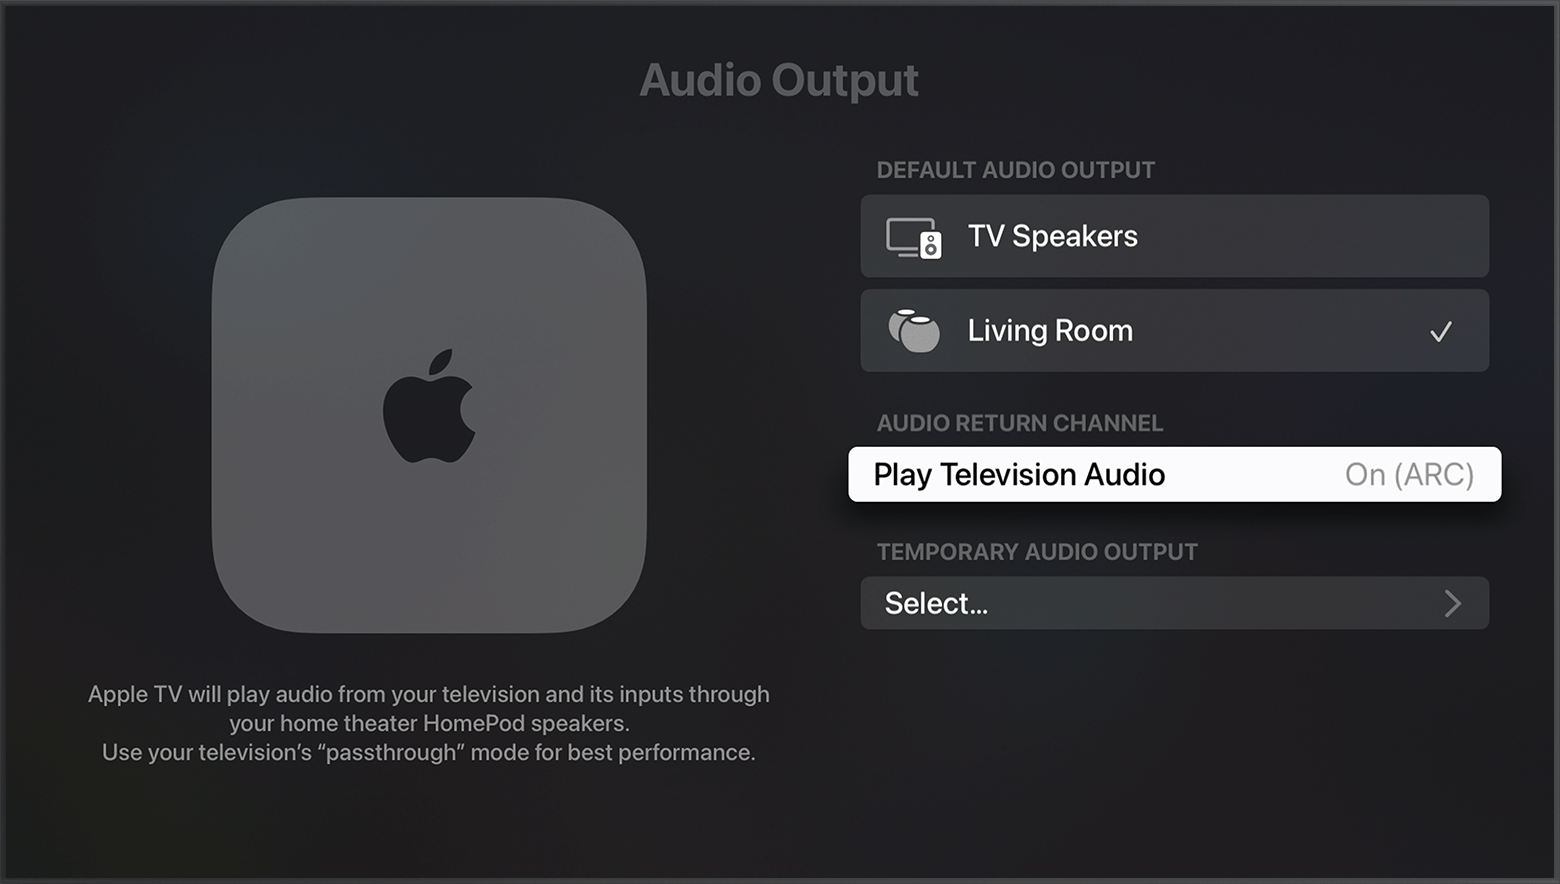 Now Playing: Control music playback on Apple TV - Apple Support